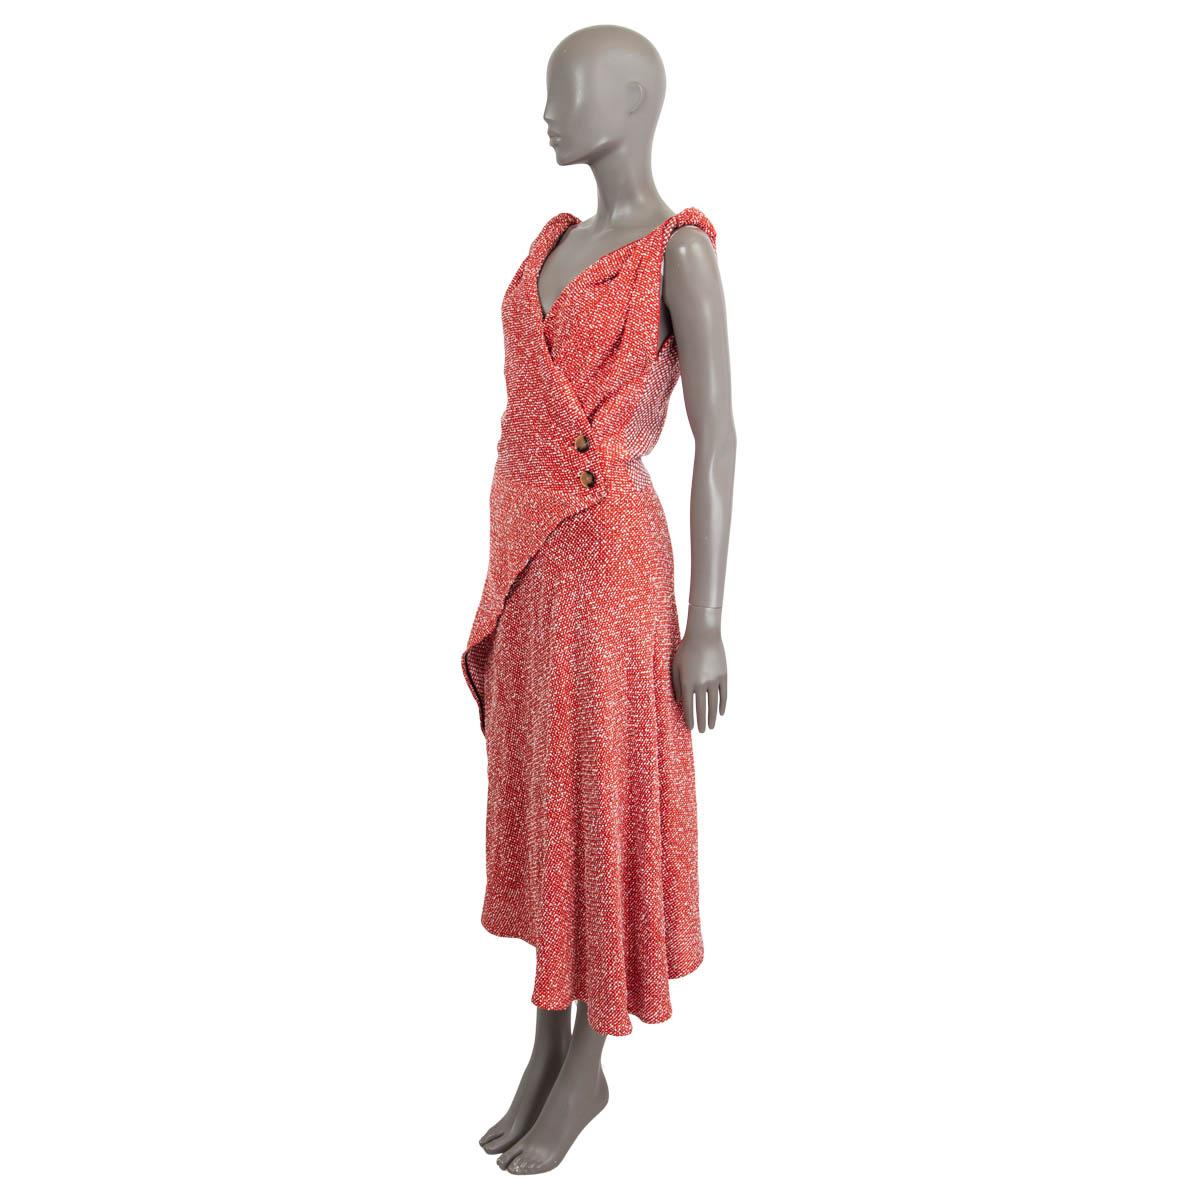 100% authentic Victoria Beckham asymmetric tweed wrap midi dress in red, white and black viscose (80%), linen (14%) and polyamide (6%). Features two braun and beige closure buttons on the side. Unlined. Has been worn and is in excellent